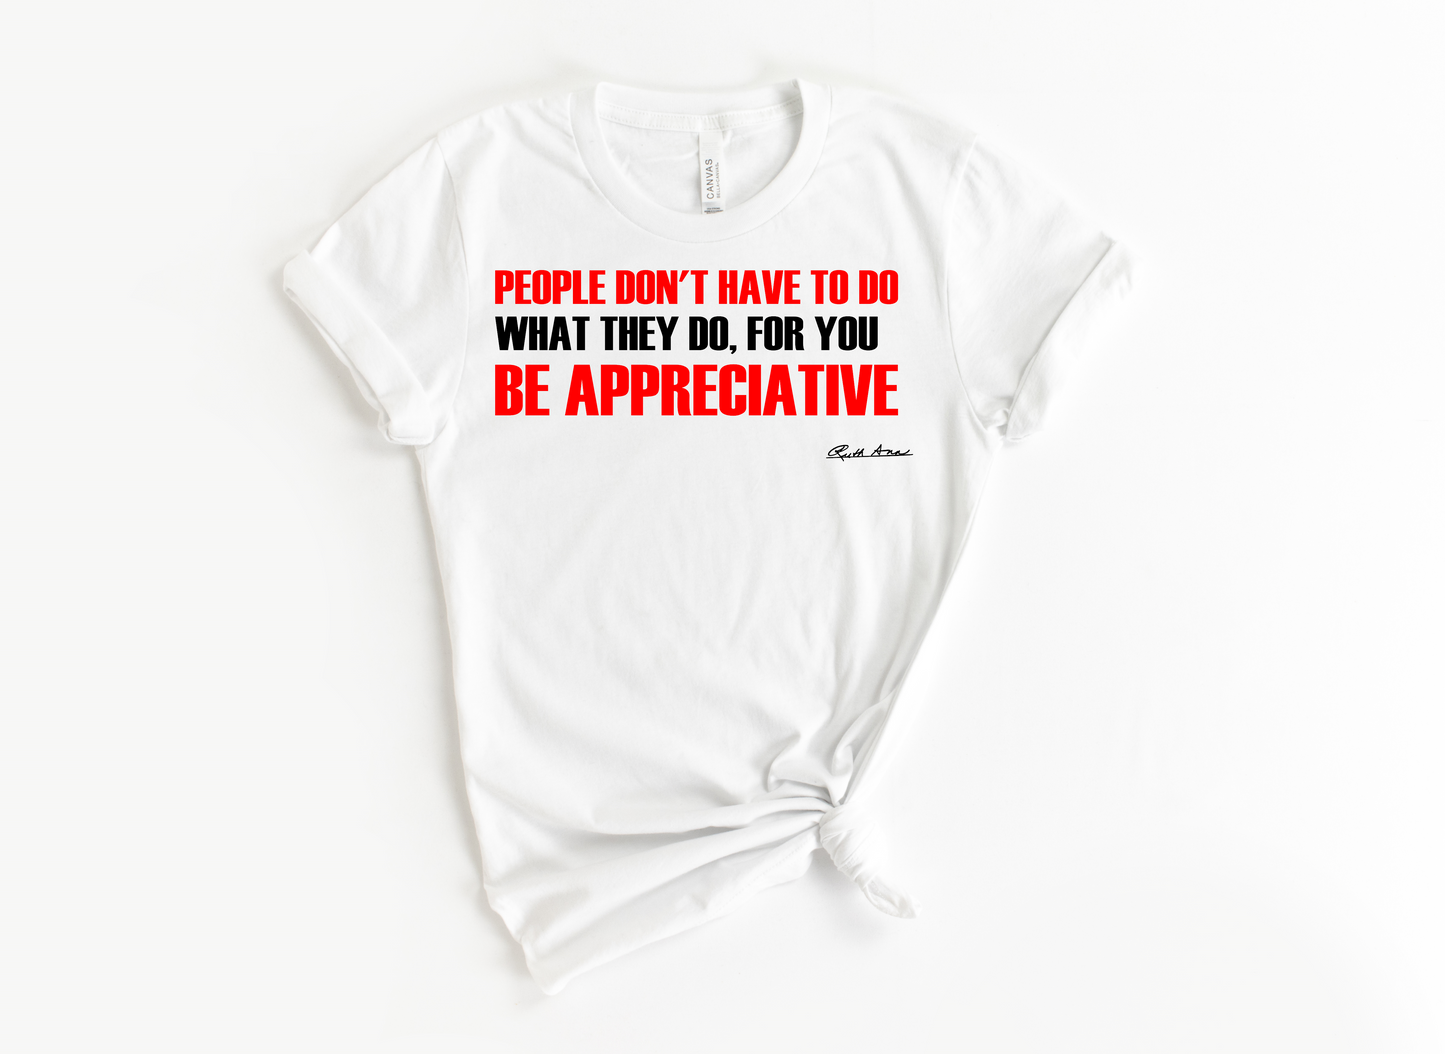 "MAMA SAID" - PEOPLE DON'T HAVE TO DO WHAT THEY DO FOR YOU...BE APPRECIATIVE - DESIGN 3